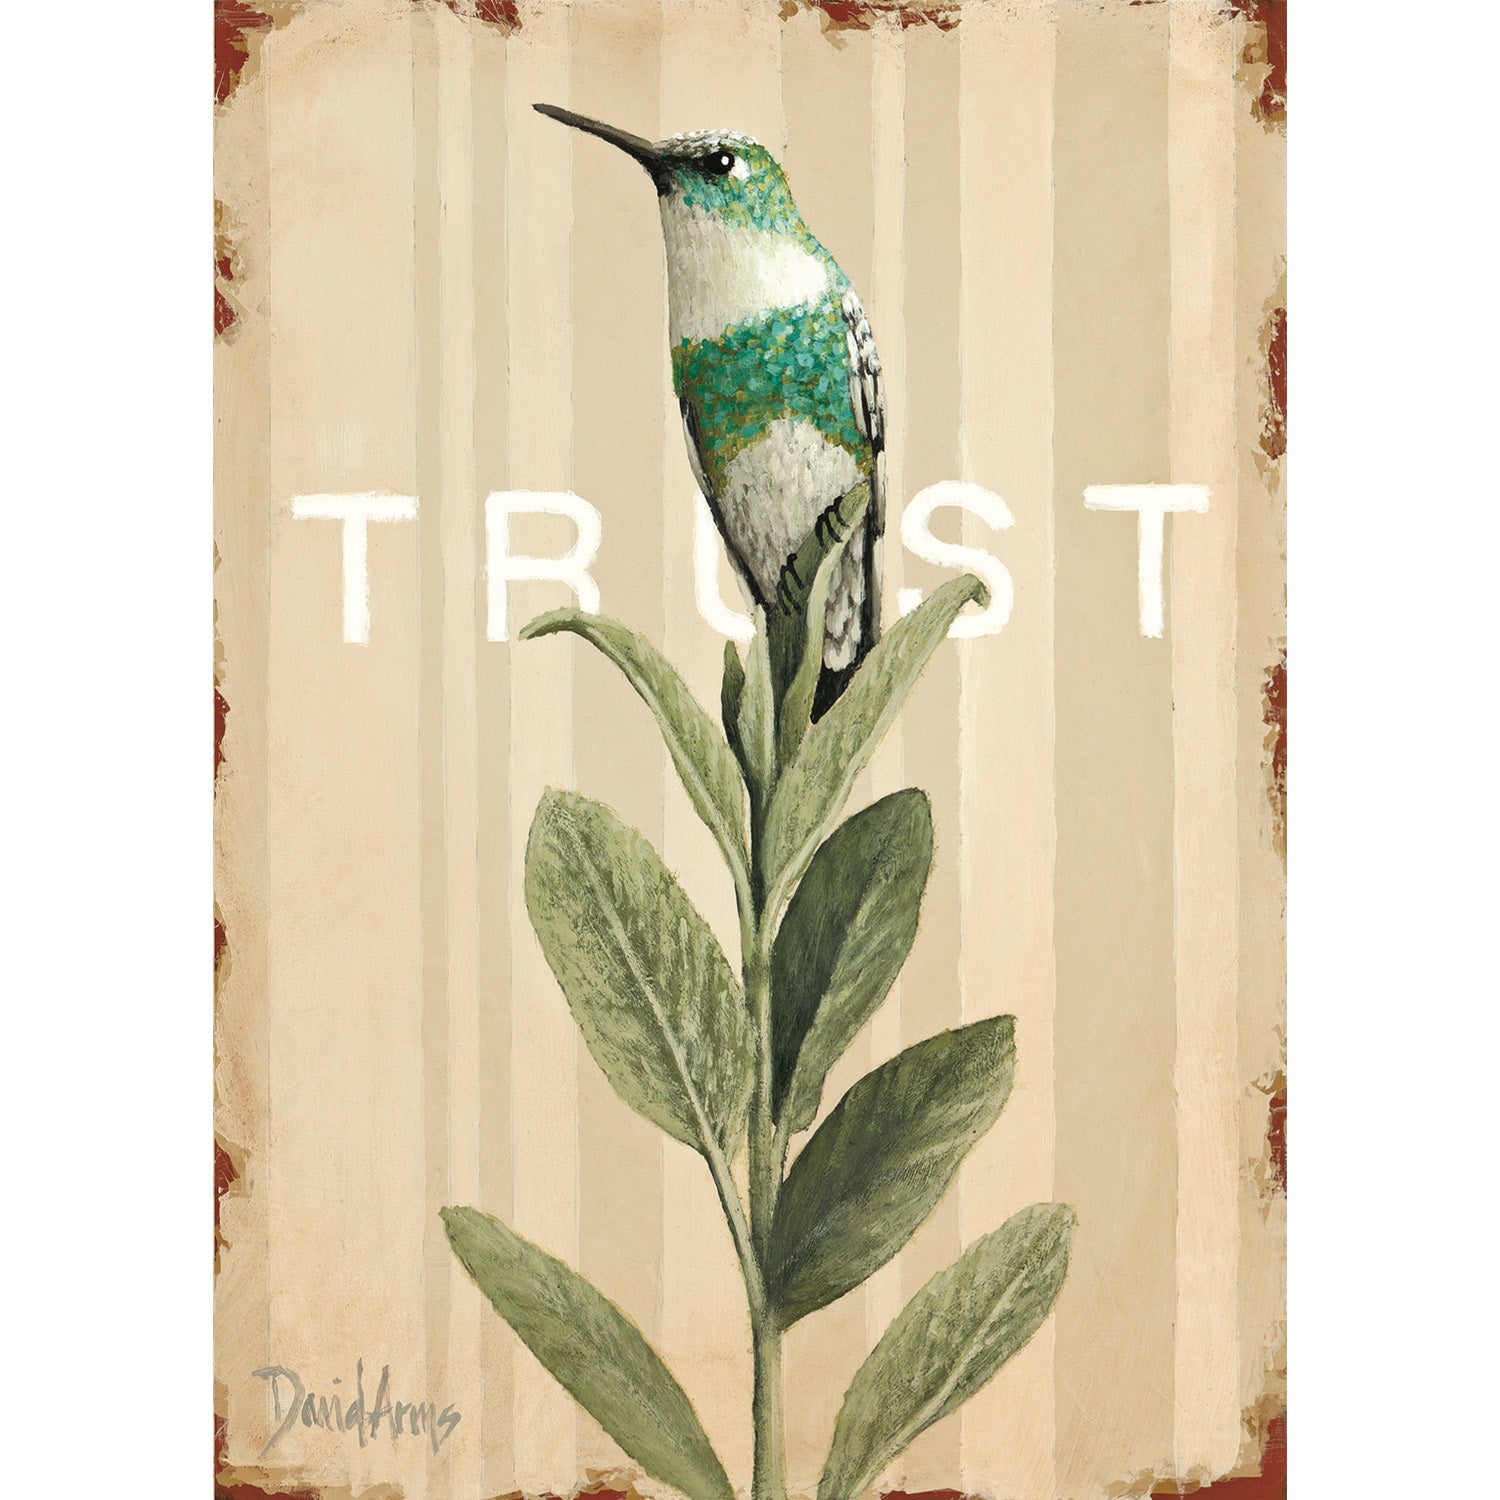 A 5&quot; x 7&quot; Trust (Sage) Card art piece featuring a hummingbird perched on a plant, created by David Arms. Brand: Hester &amp; Cook.